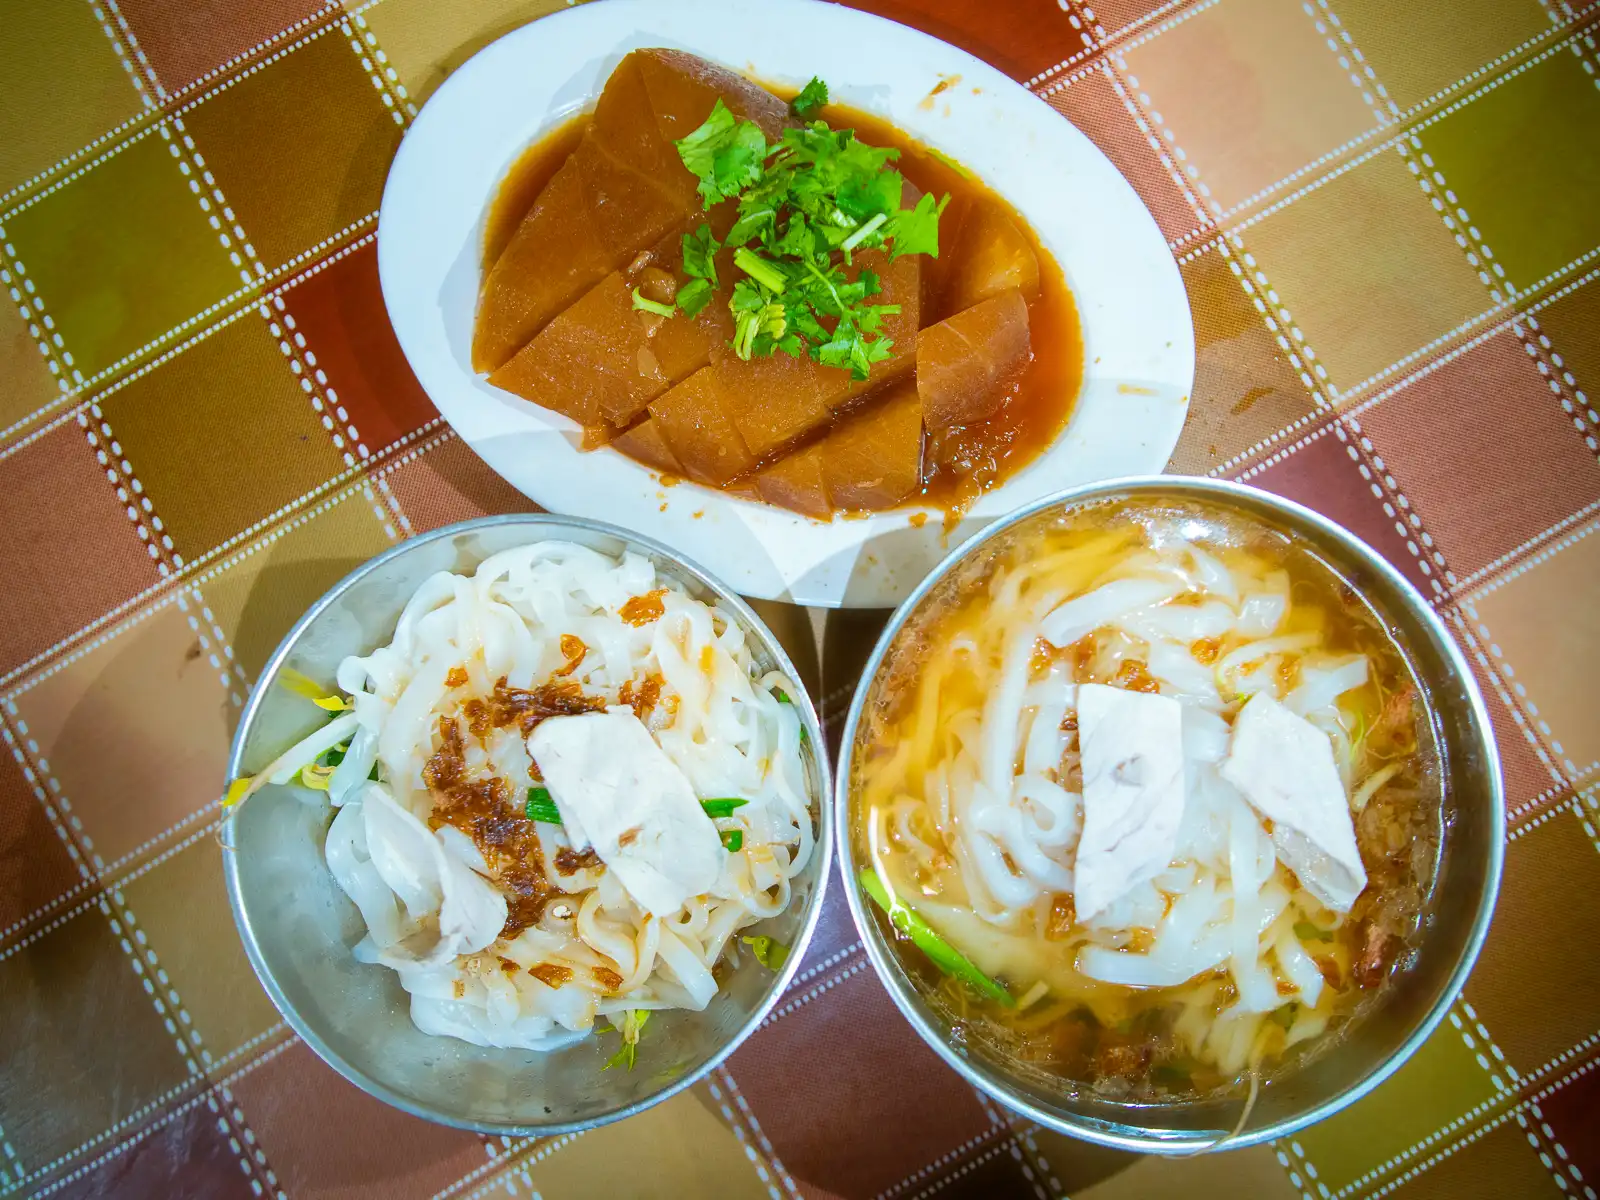 Two bowls of bantiao, one immersed in soup, and a serving of marinated radish.